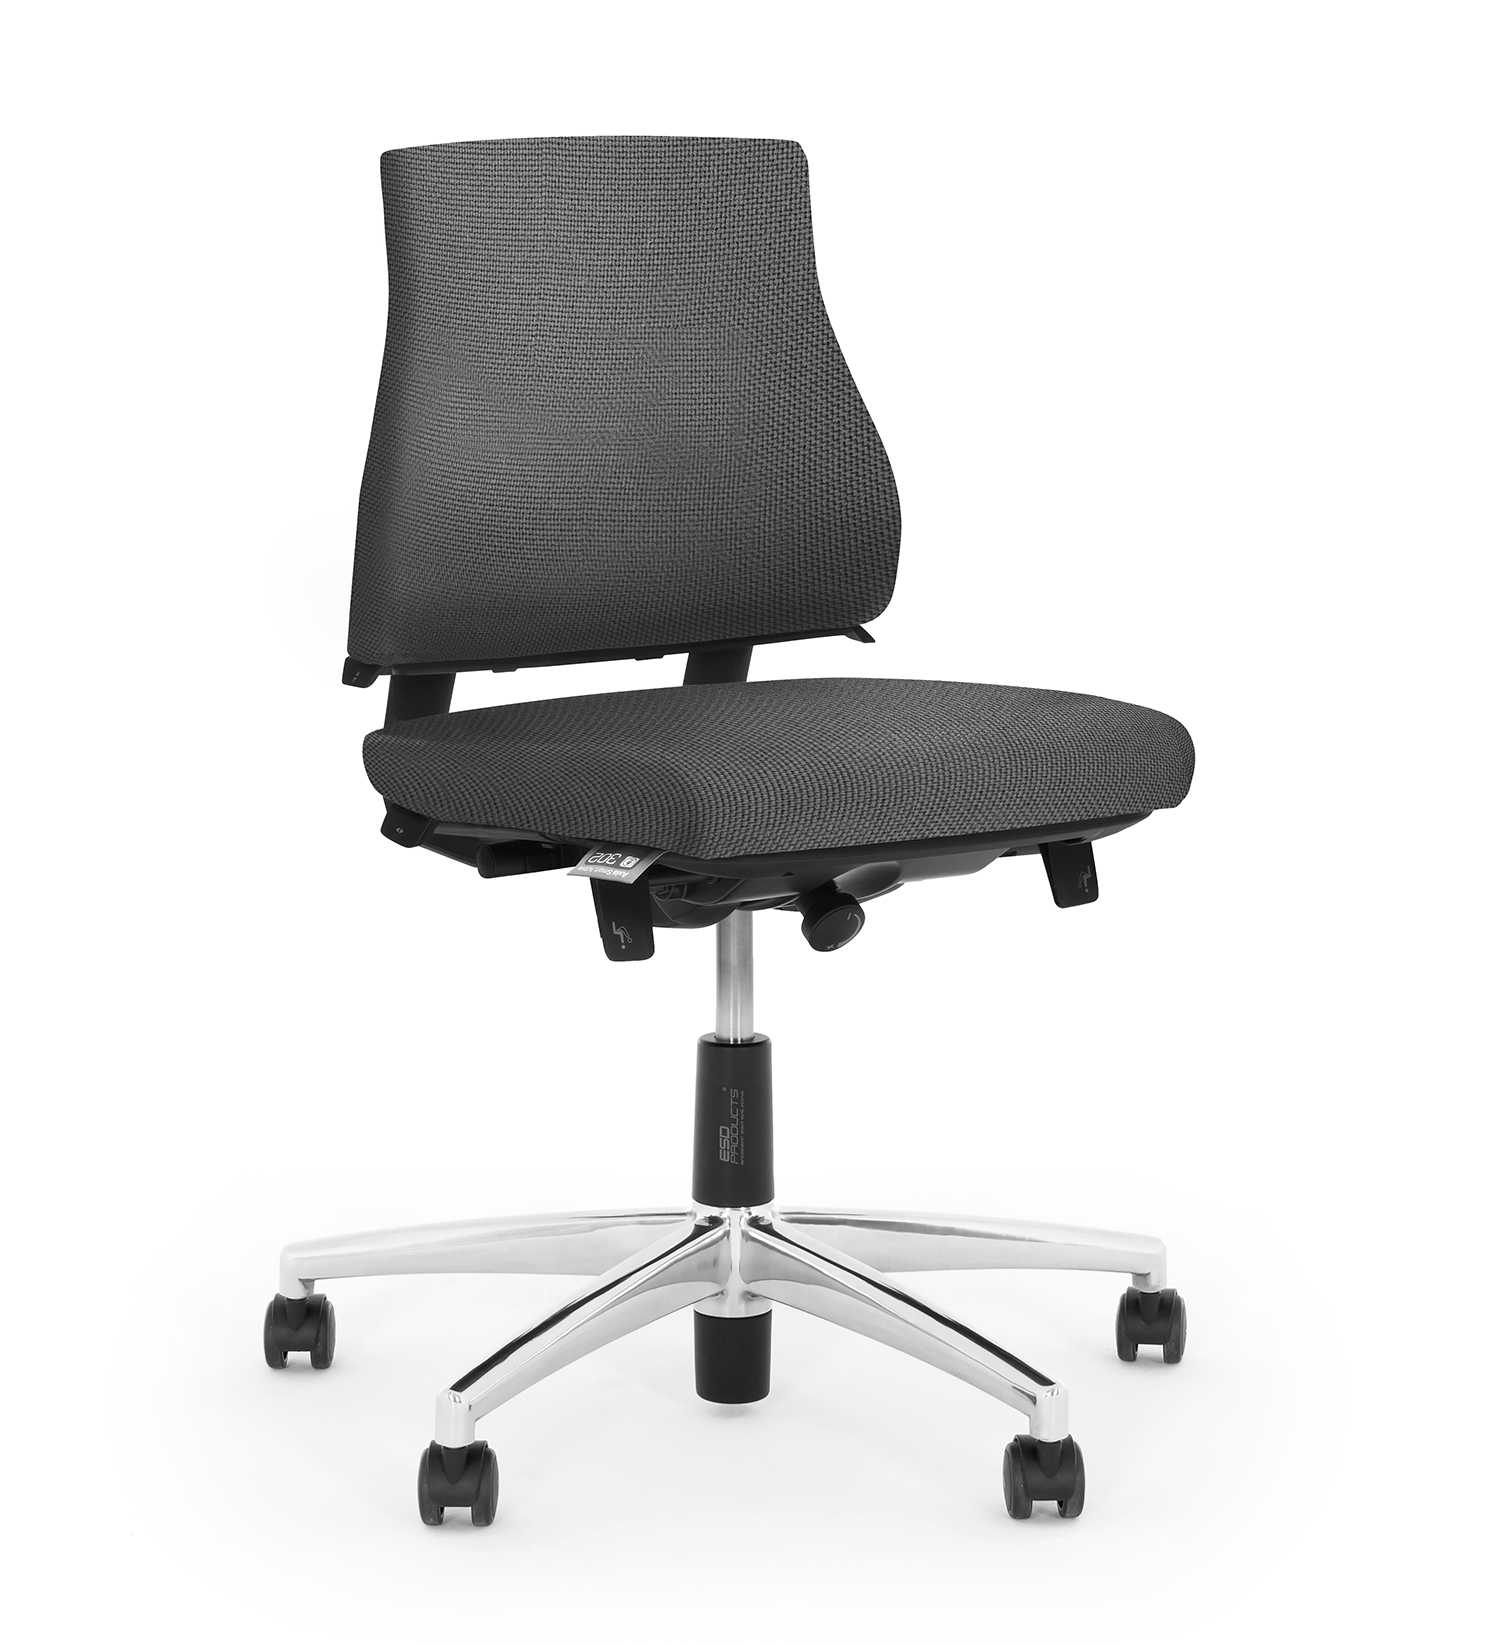 ESD Office Chair Without Armrests AES 2.1 Medium High Backrest Chair Grey Fabric ESD Soft Castors BMA Axia 2.1 Office Chairs Flokk - 530-2.1.ON-3AZ-AP-GLOBAL-ESD-GRE